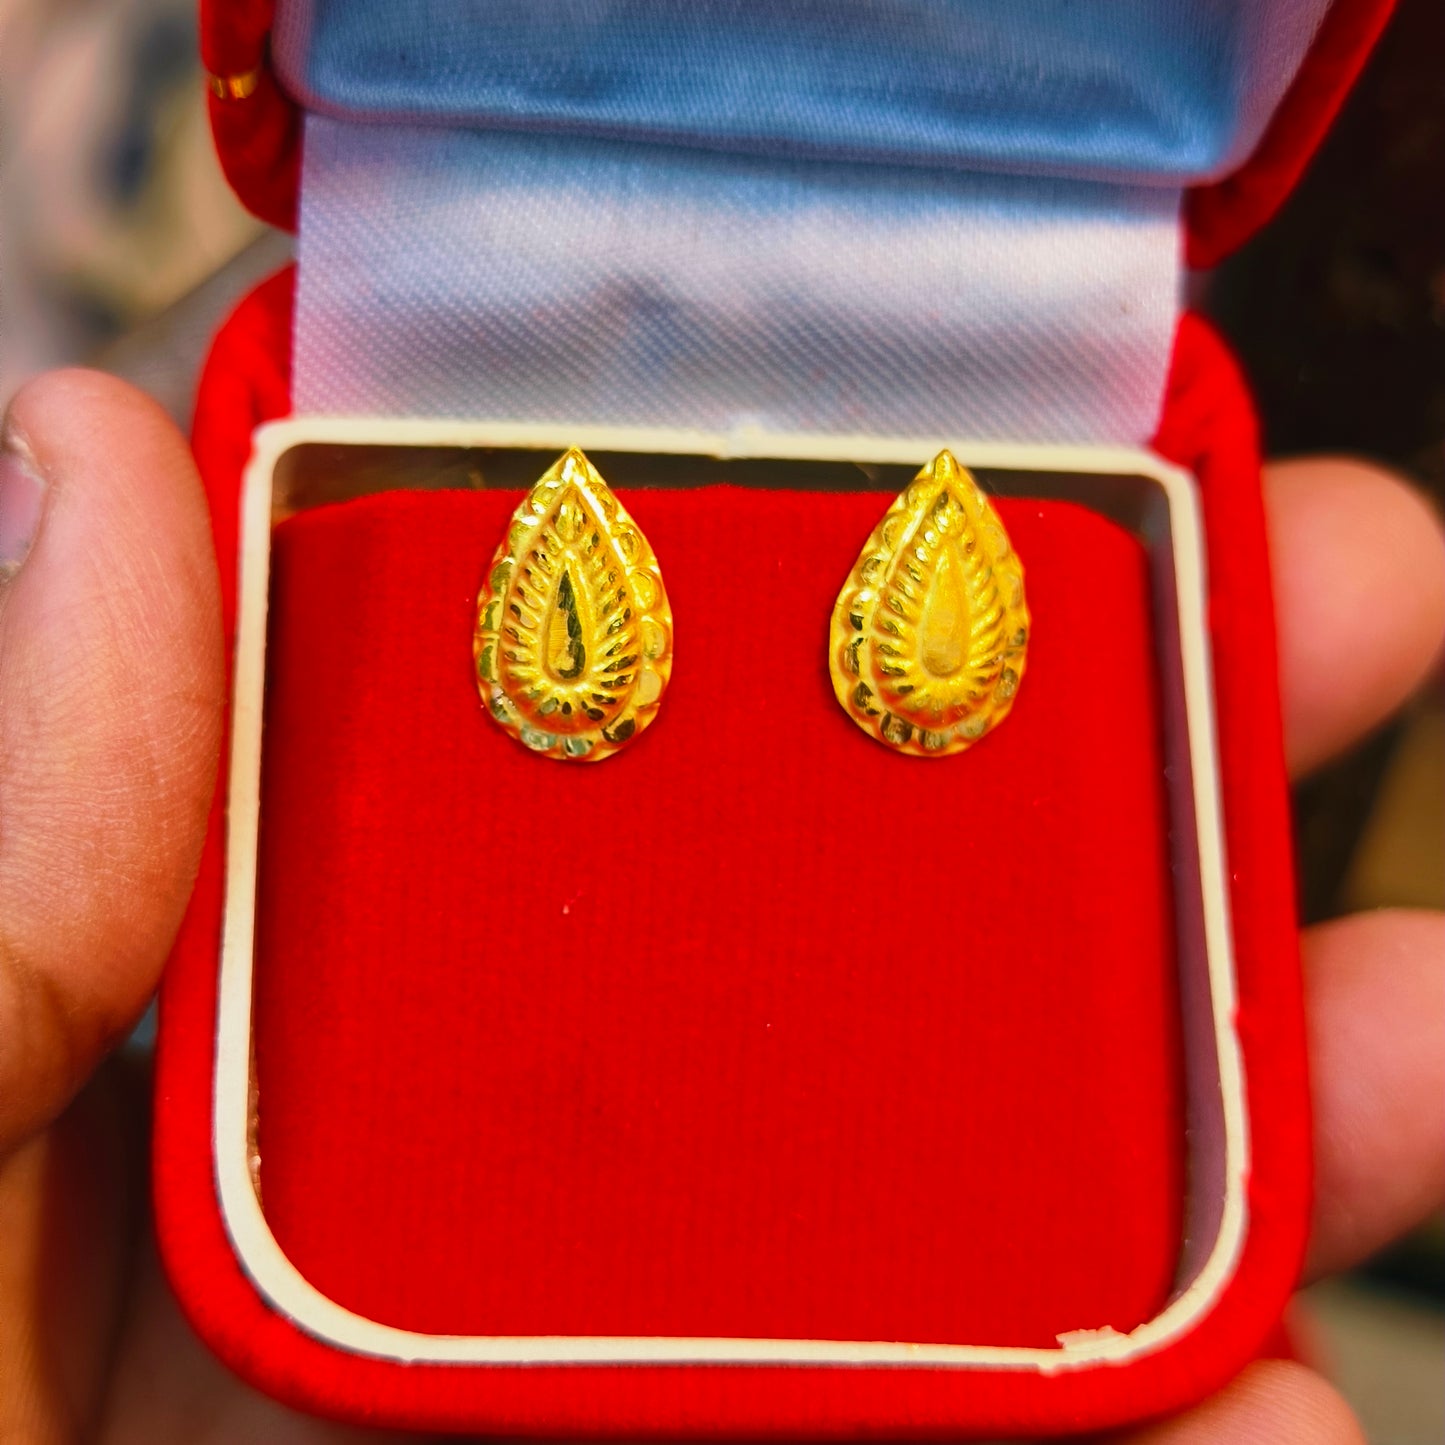 KDM GOLD EAR TOPS FOR GIFT PURPOSE IN MARRIAGE AND ANNIVERSARY 1 PAIR APPROX WGT: 0.250 GM